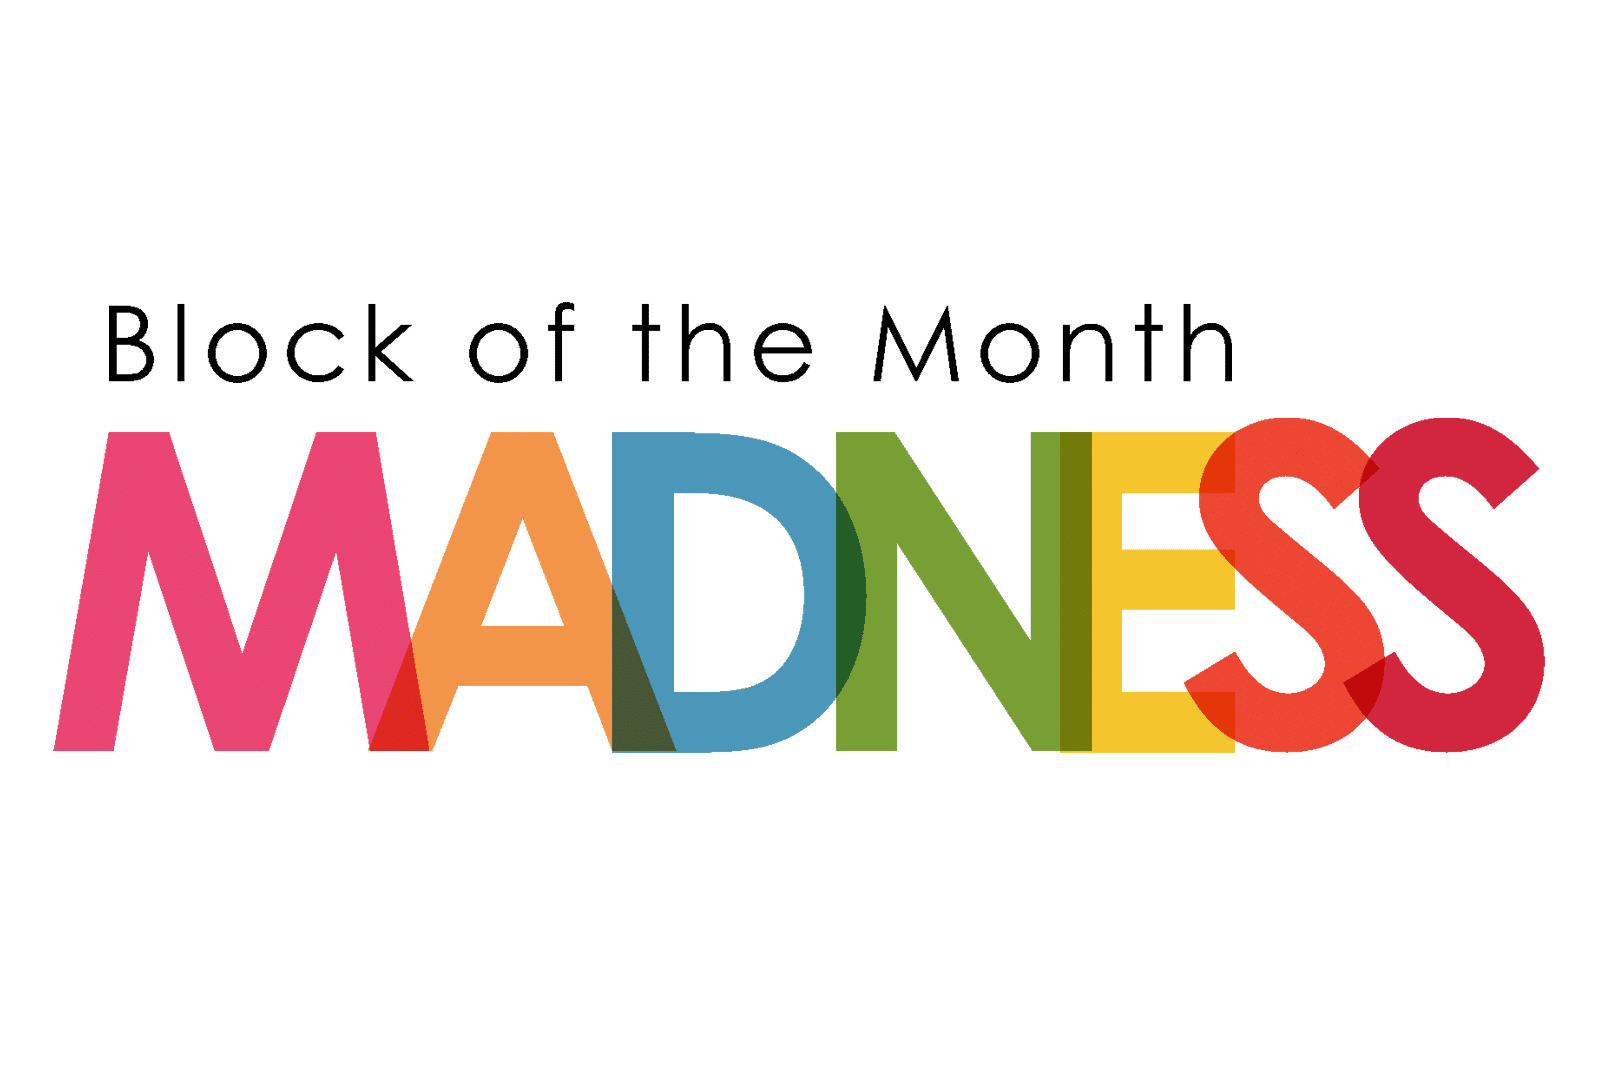 Block of the Month madness